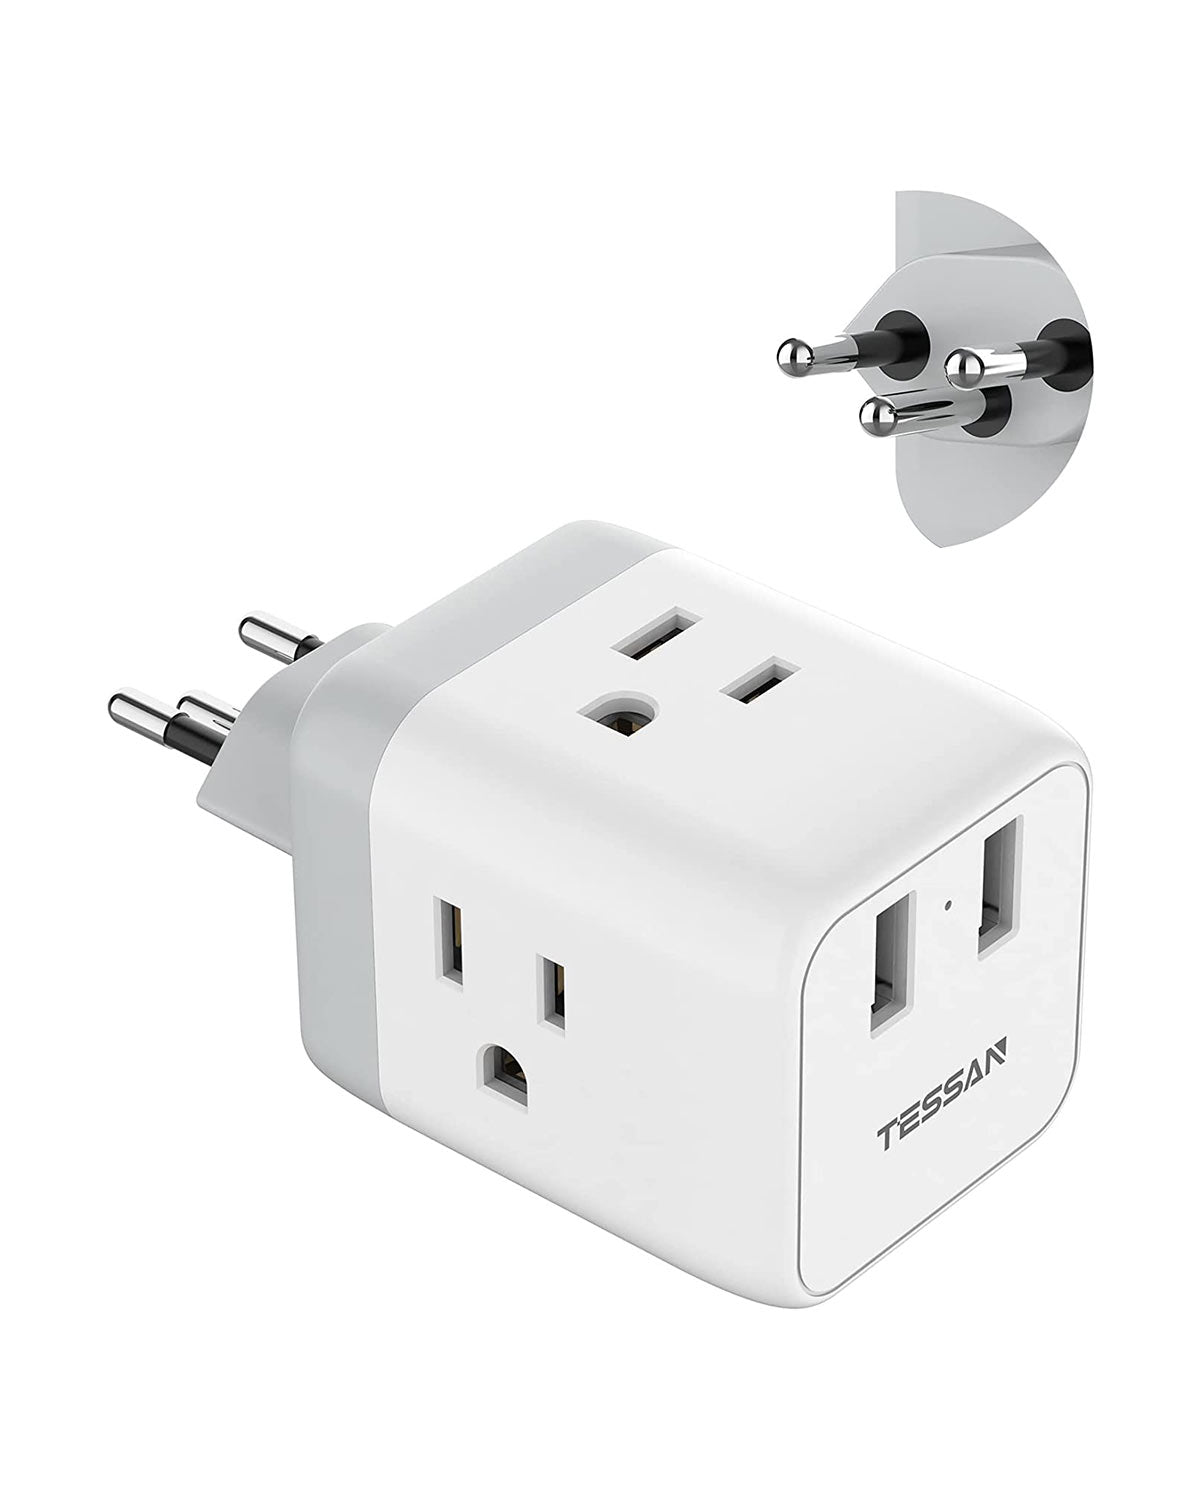 TESSAN US to Switzerland Travel Power Adaptor with 3 Outlets 2 USB Ports